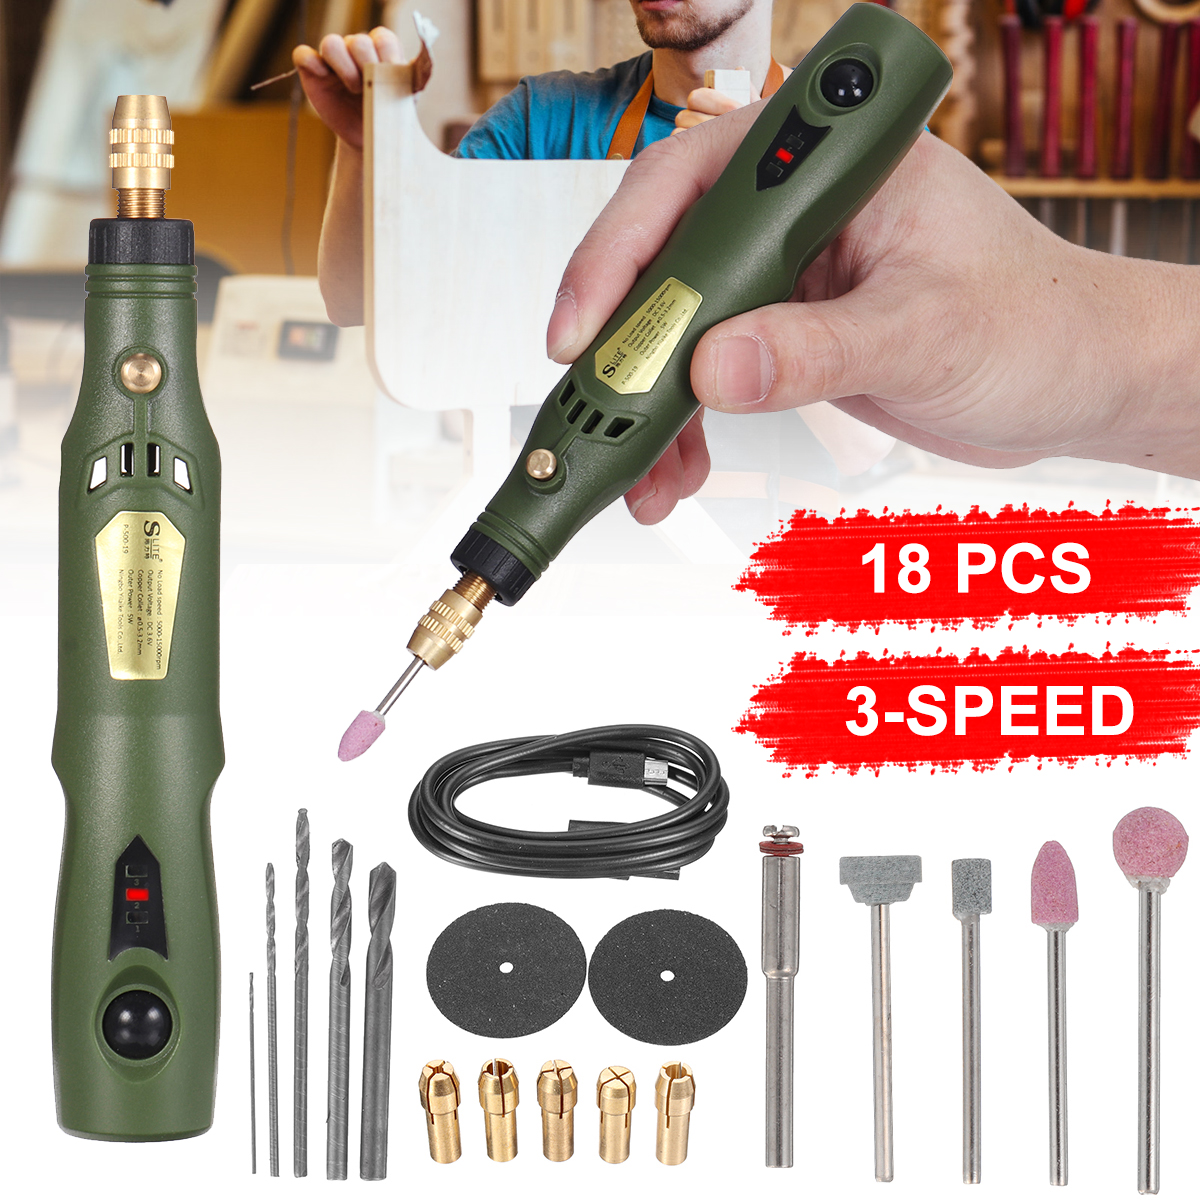 18pcs-36V-USB-Rechargeable-DIY-Electric-Engraving-Pen-Carve-Tool-For-Jewelry-Metal-Glass-Ceramic-1803310-1